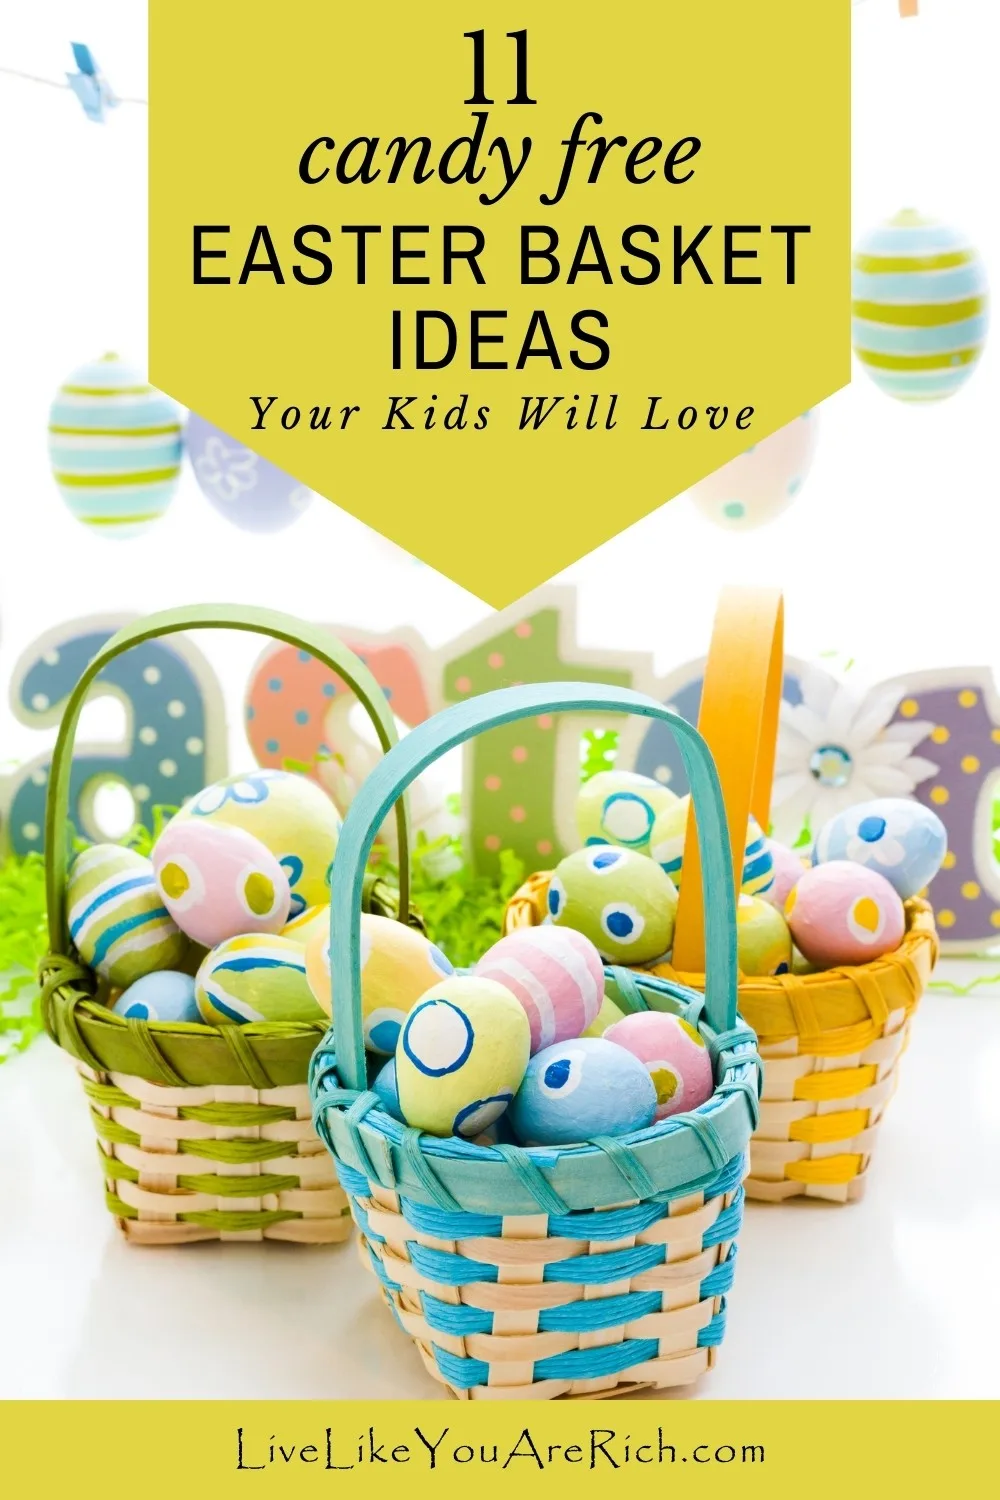 Easter is here which means it’s time to start preparing those Easter baskets. I rounded up these 11 Easter Basket Ideas for Kids (Candy Free).